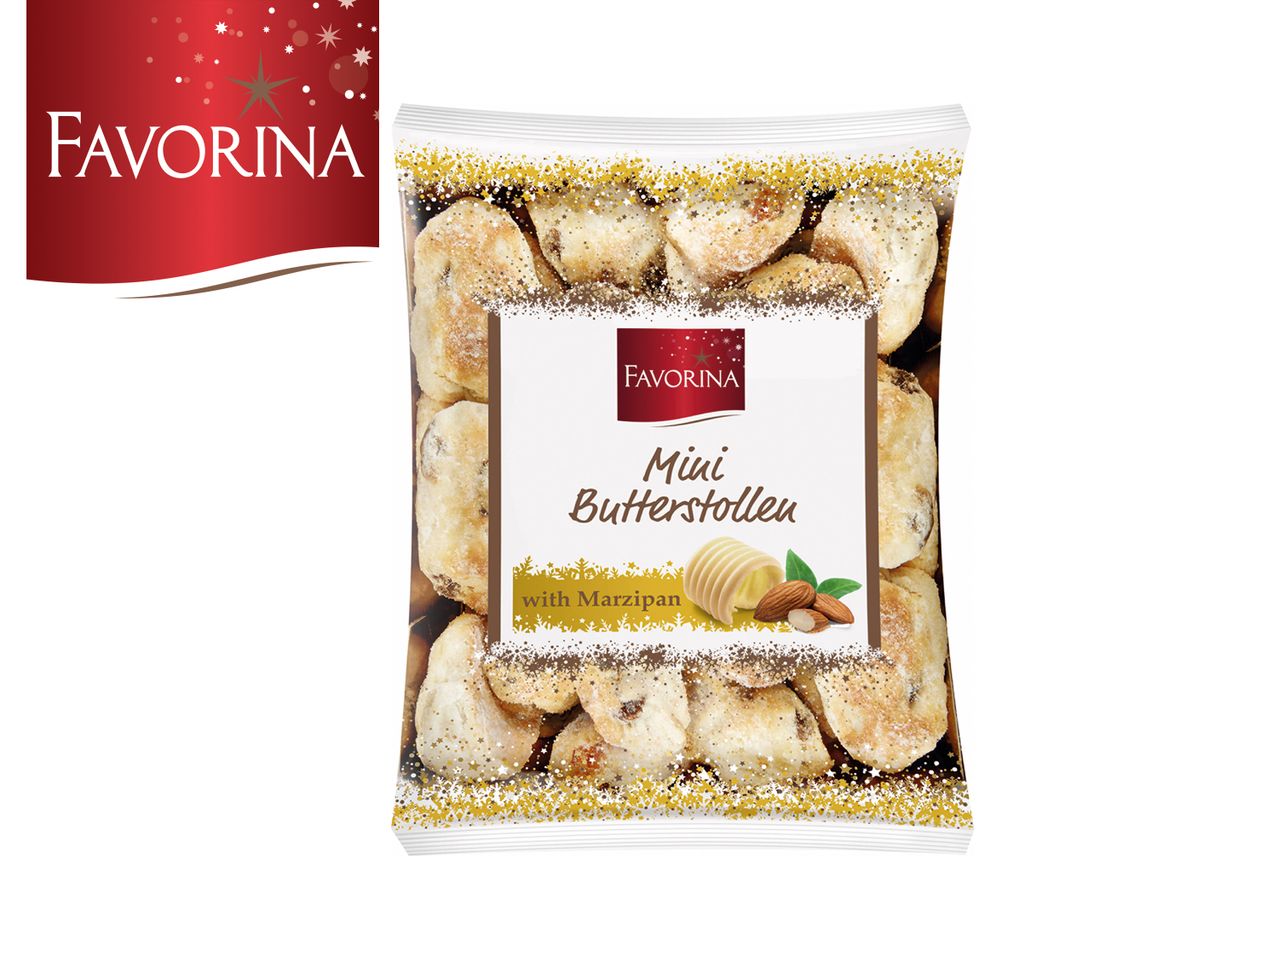 Go to full screen view: Favorina All Butter Mini Stollen Bites - Image 1